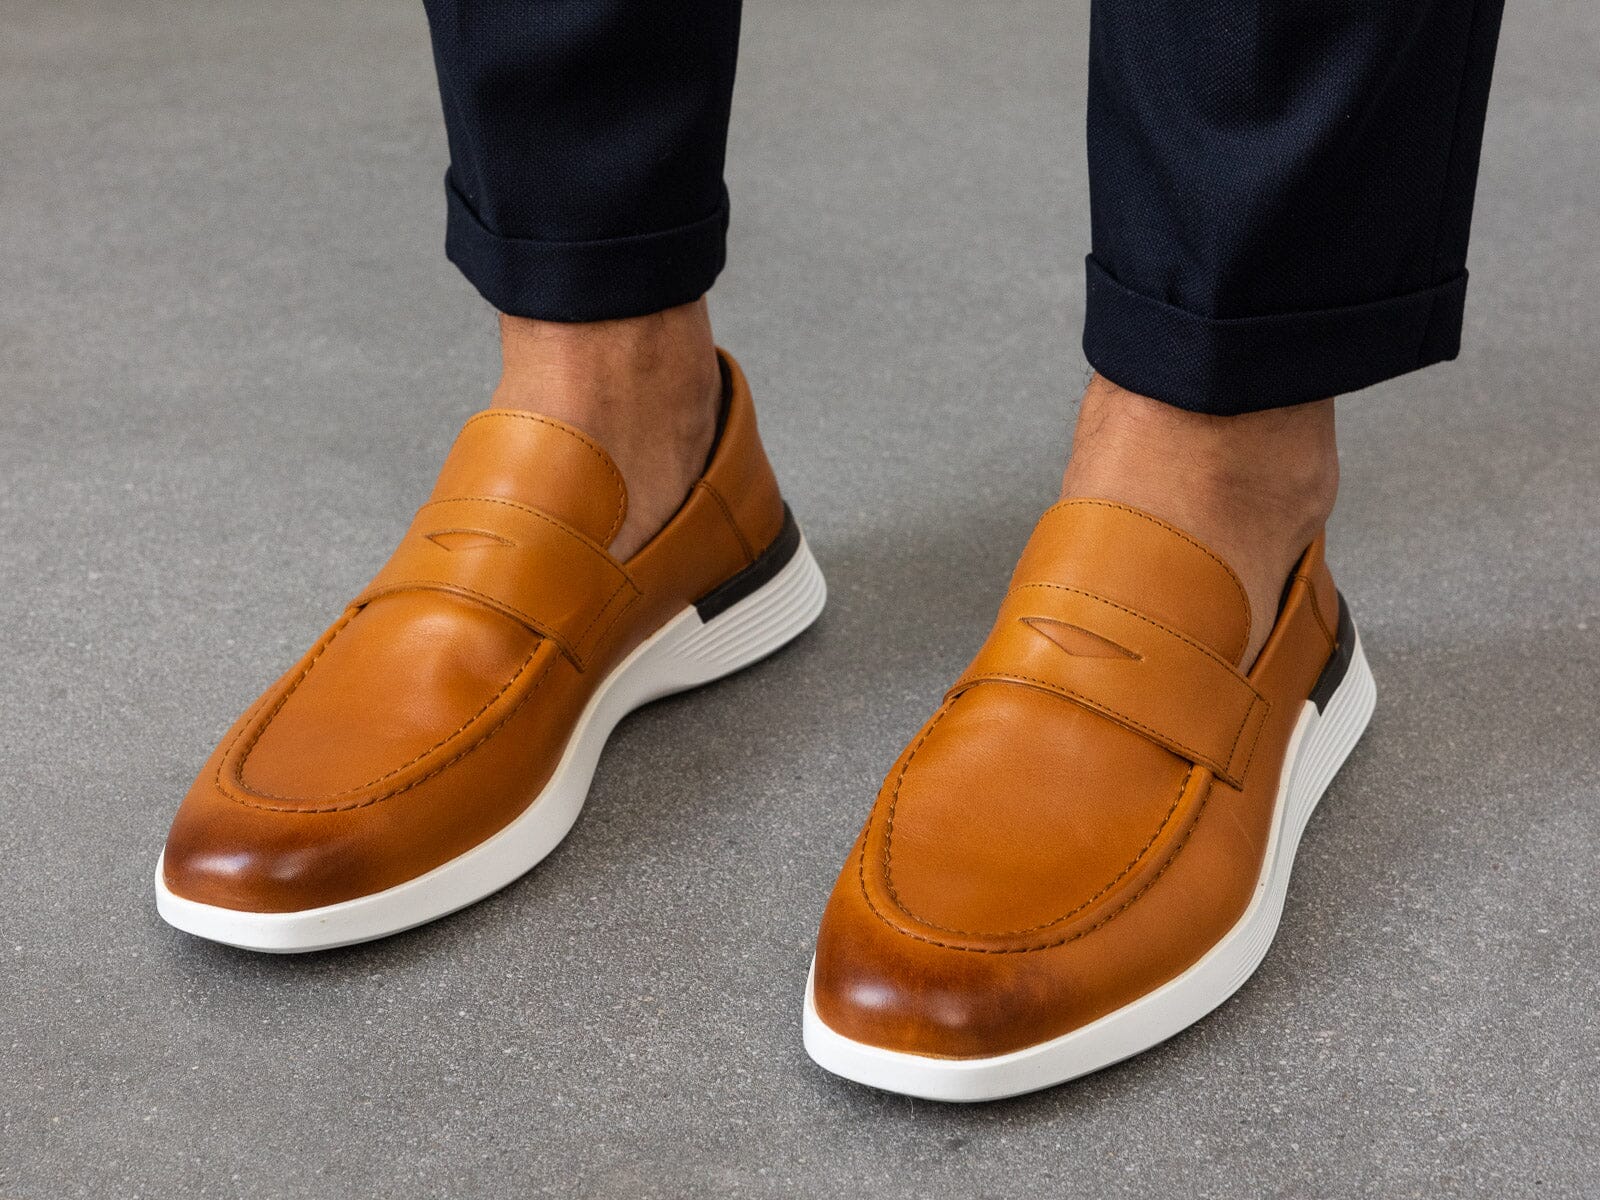 Paul Smith Sotto Burnished Leather Sneakers, $358 | MR PORTER | Lookastic